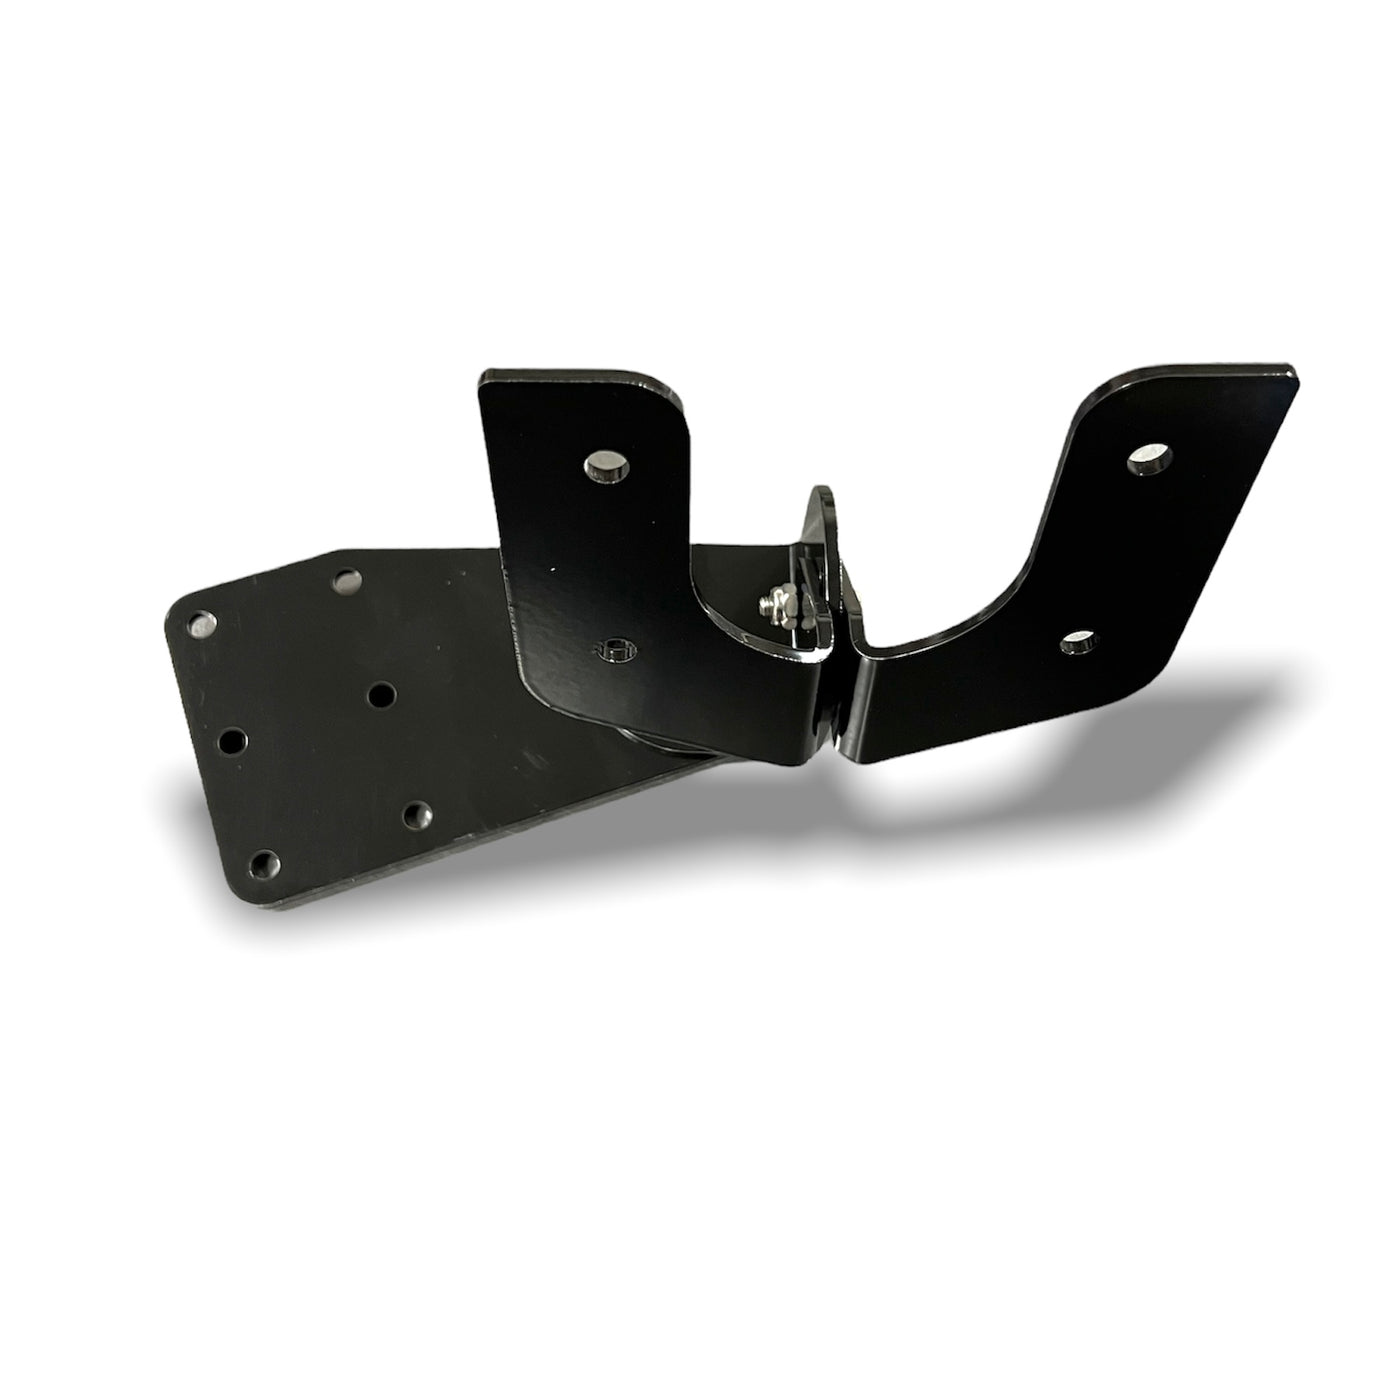 CAN Keypad Switch Panel Mount